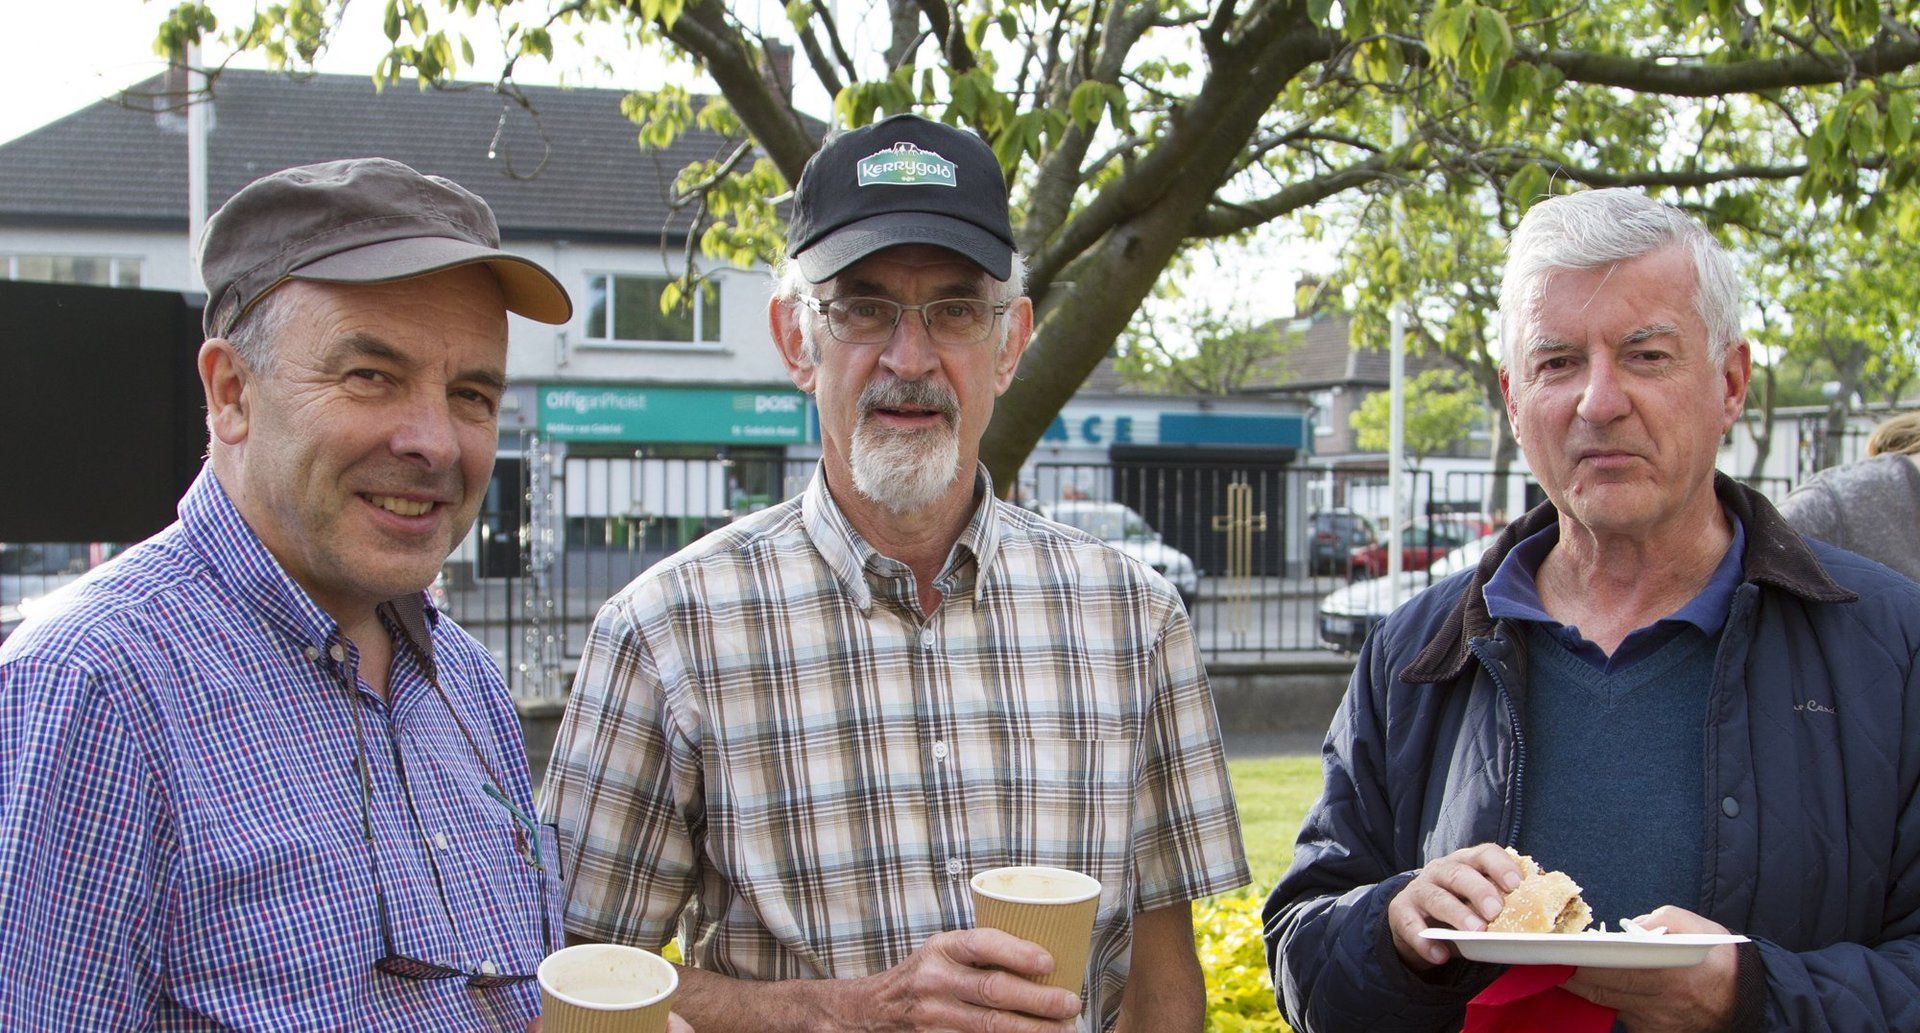 Three men are standing next to each other holding cups of coffee and a plate of food.